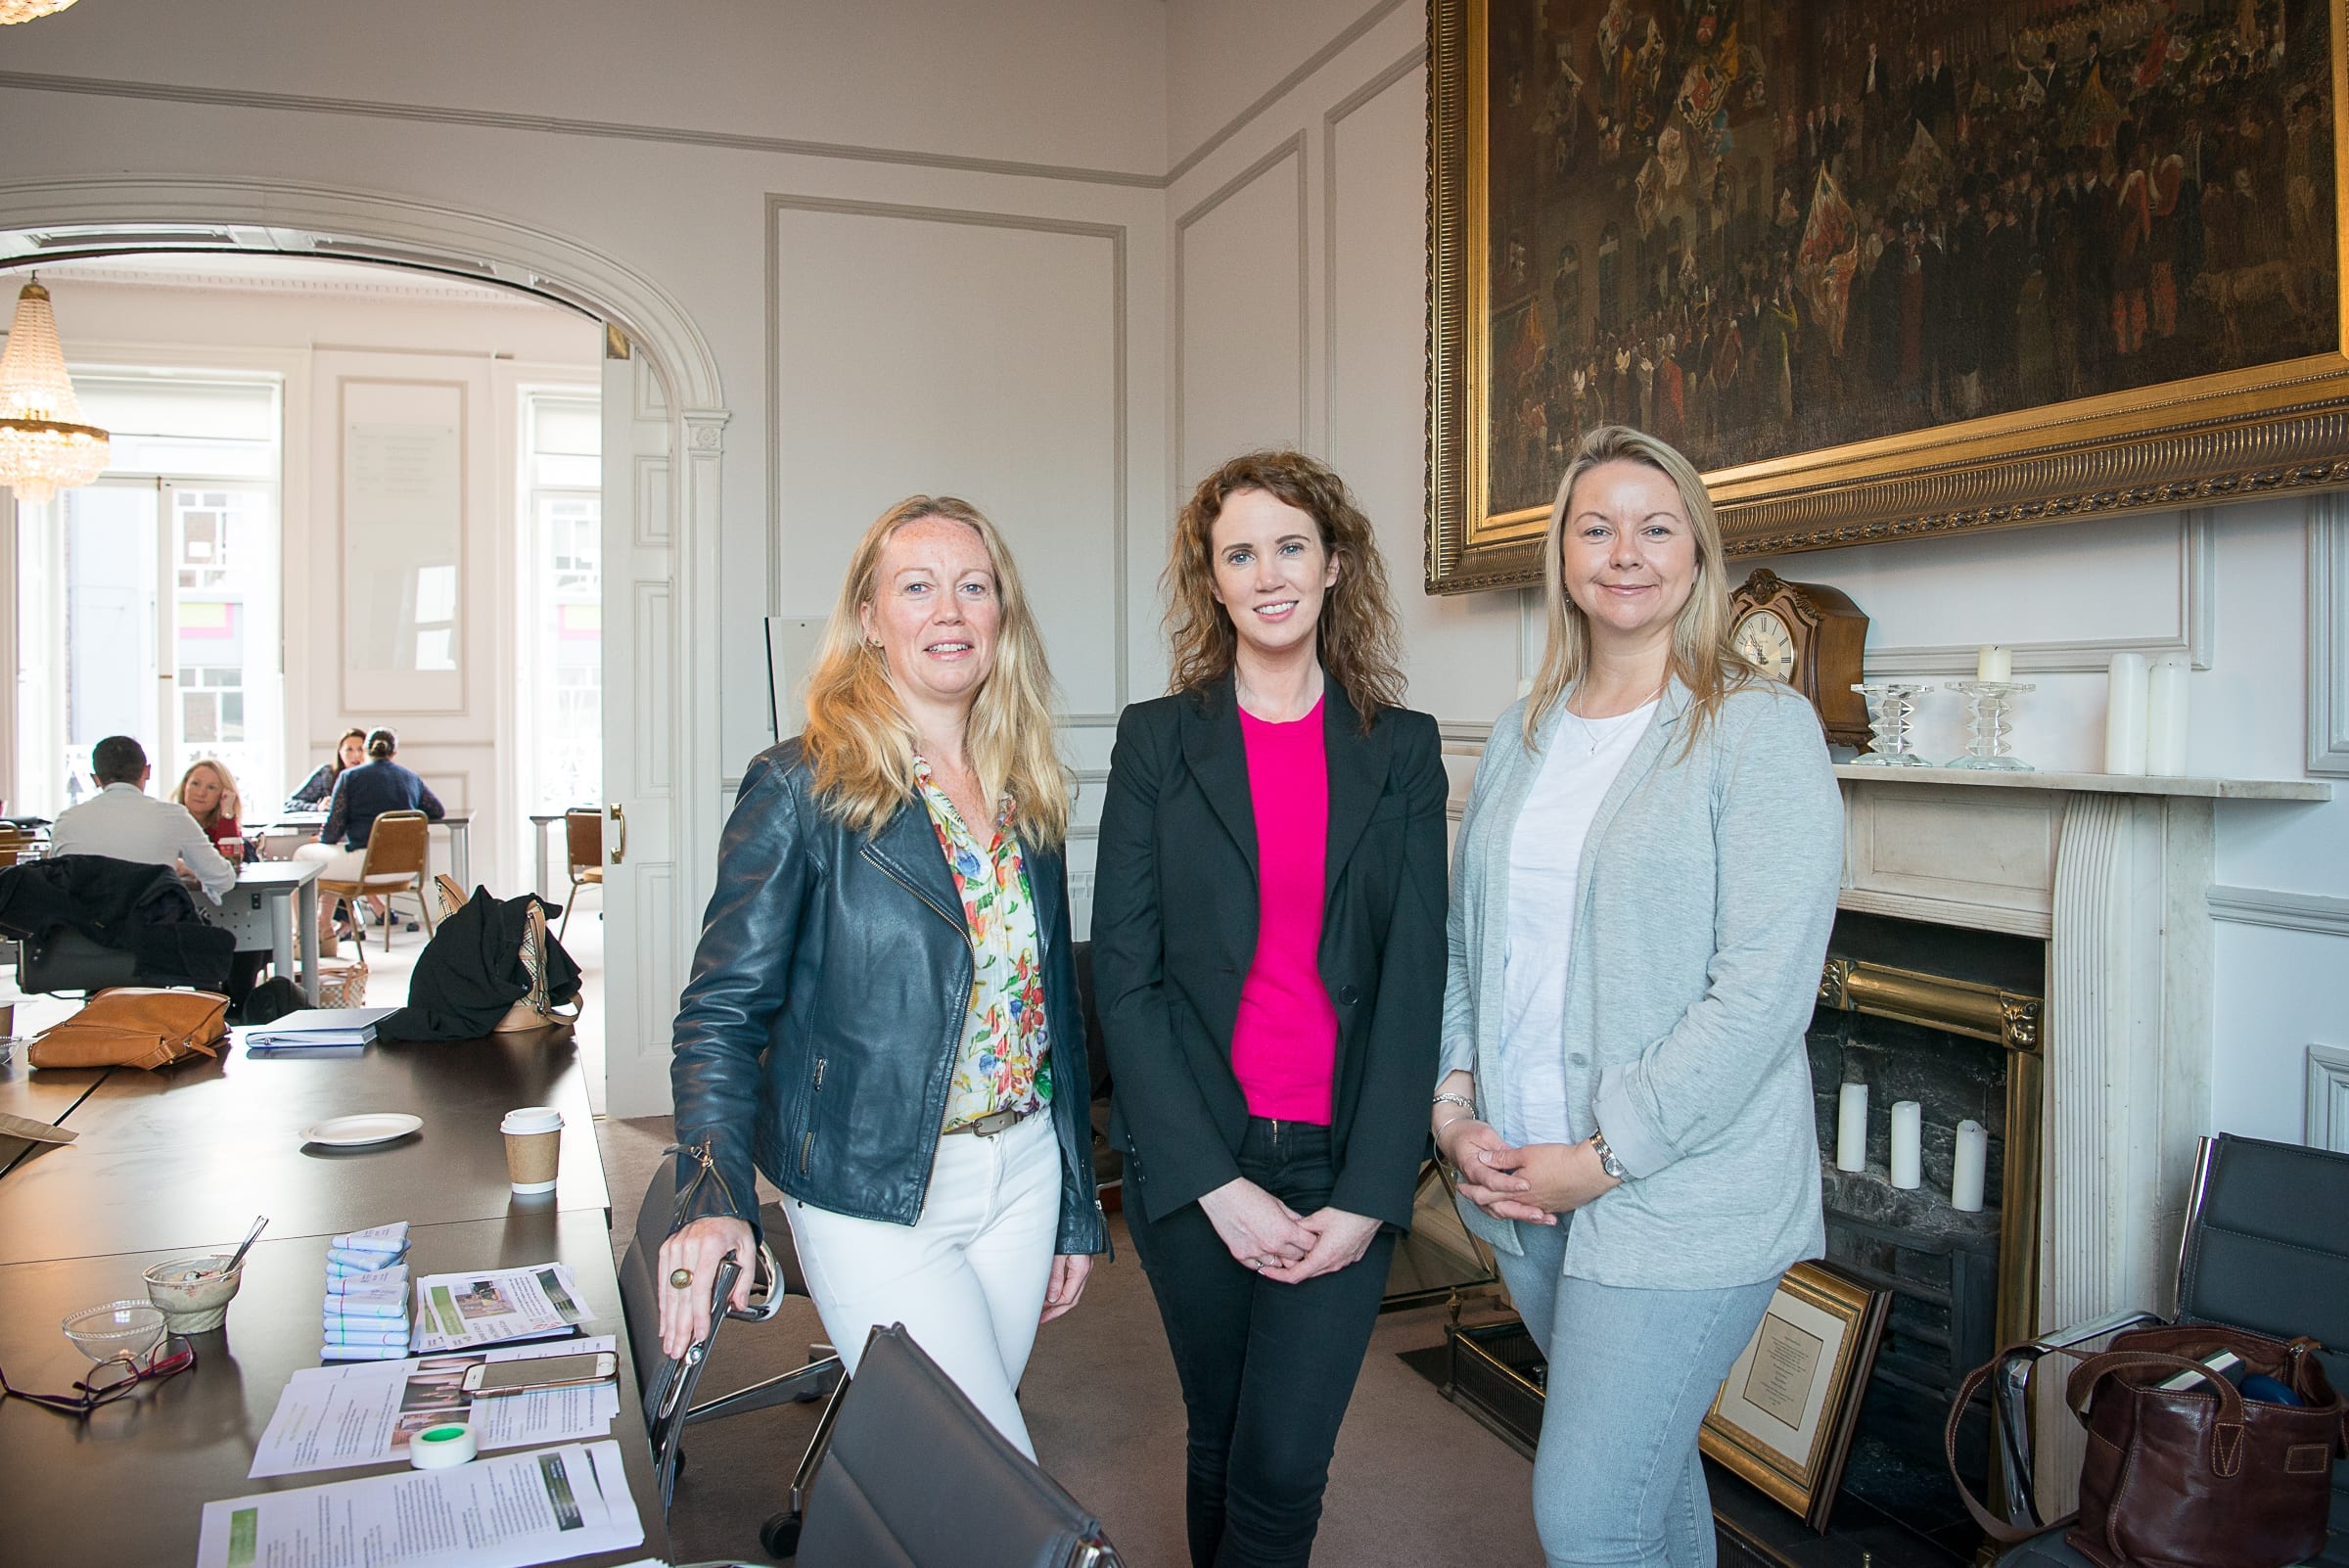 From Left to Right:  Marketing Collective Advice Clinic supported by Skillnet
which took place on the 30th May in function room of the Limerick Chamber:Eileen Sheehan - Eileen Sheehan Wellness, Mary McNamee- Limerick Chamber, Annie Browne- Action Point.  
Photo by Morning Star Photography